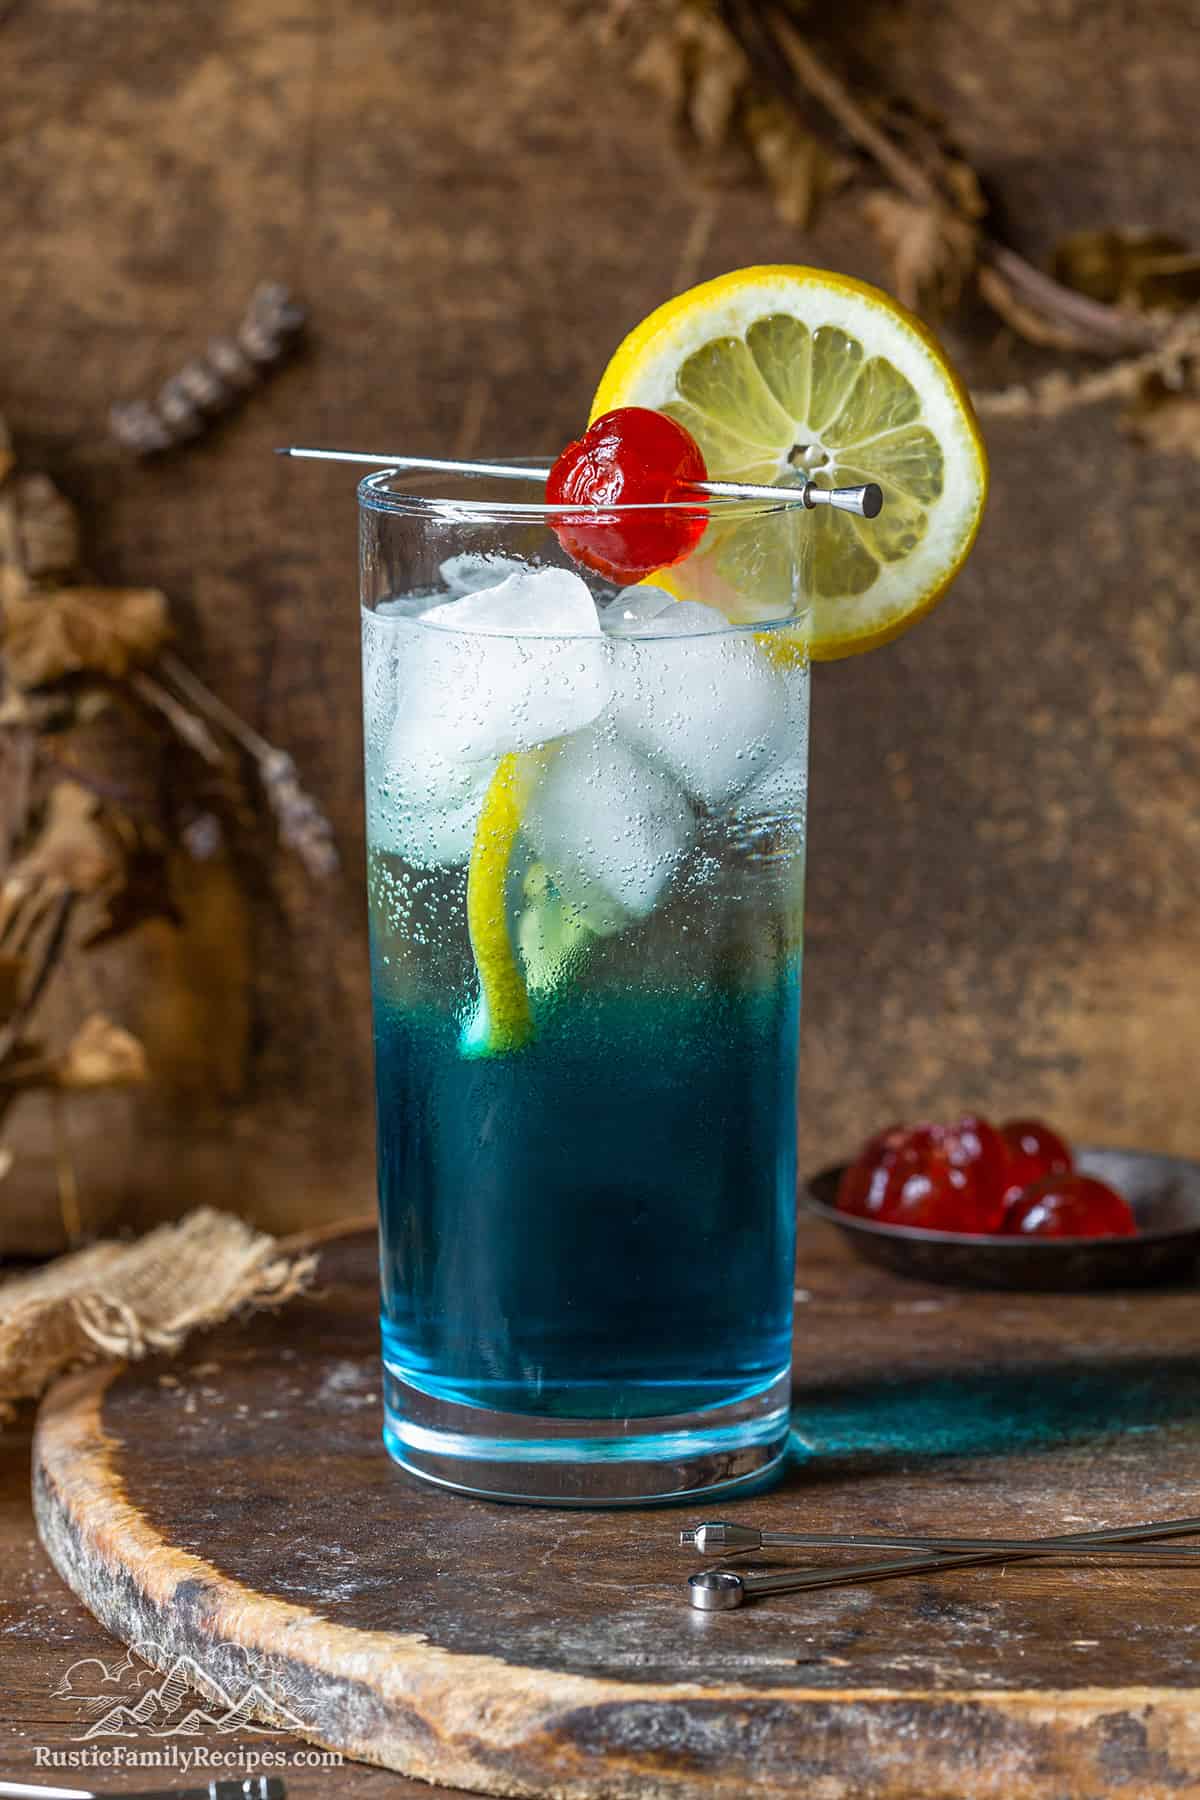 Blue AMF cocktail with a lemon slice and cherry